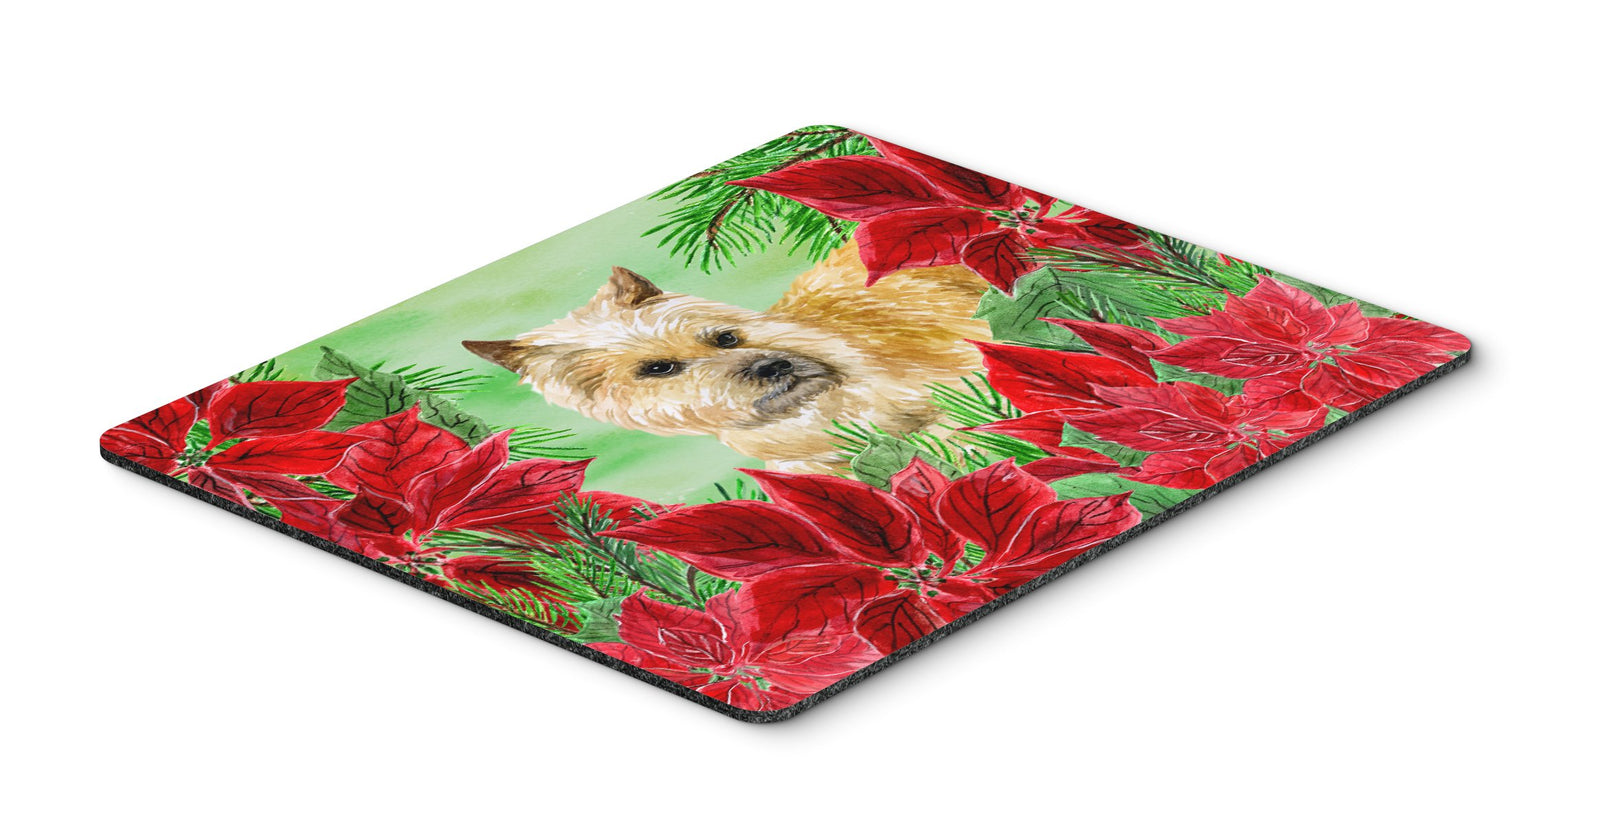 Cairn Terrier Poinsettas Mouse Pad, Hot Pad or Trivet CK1338MP by Caroline's Treasures